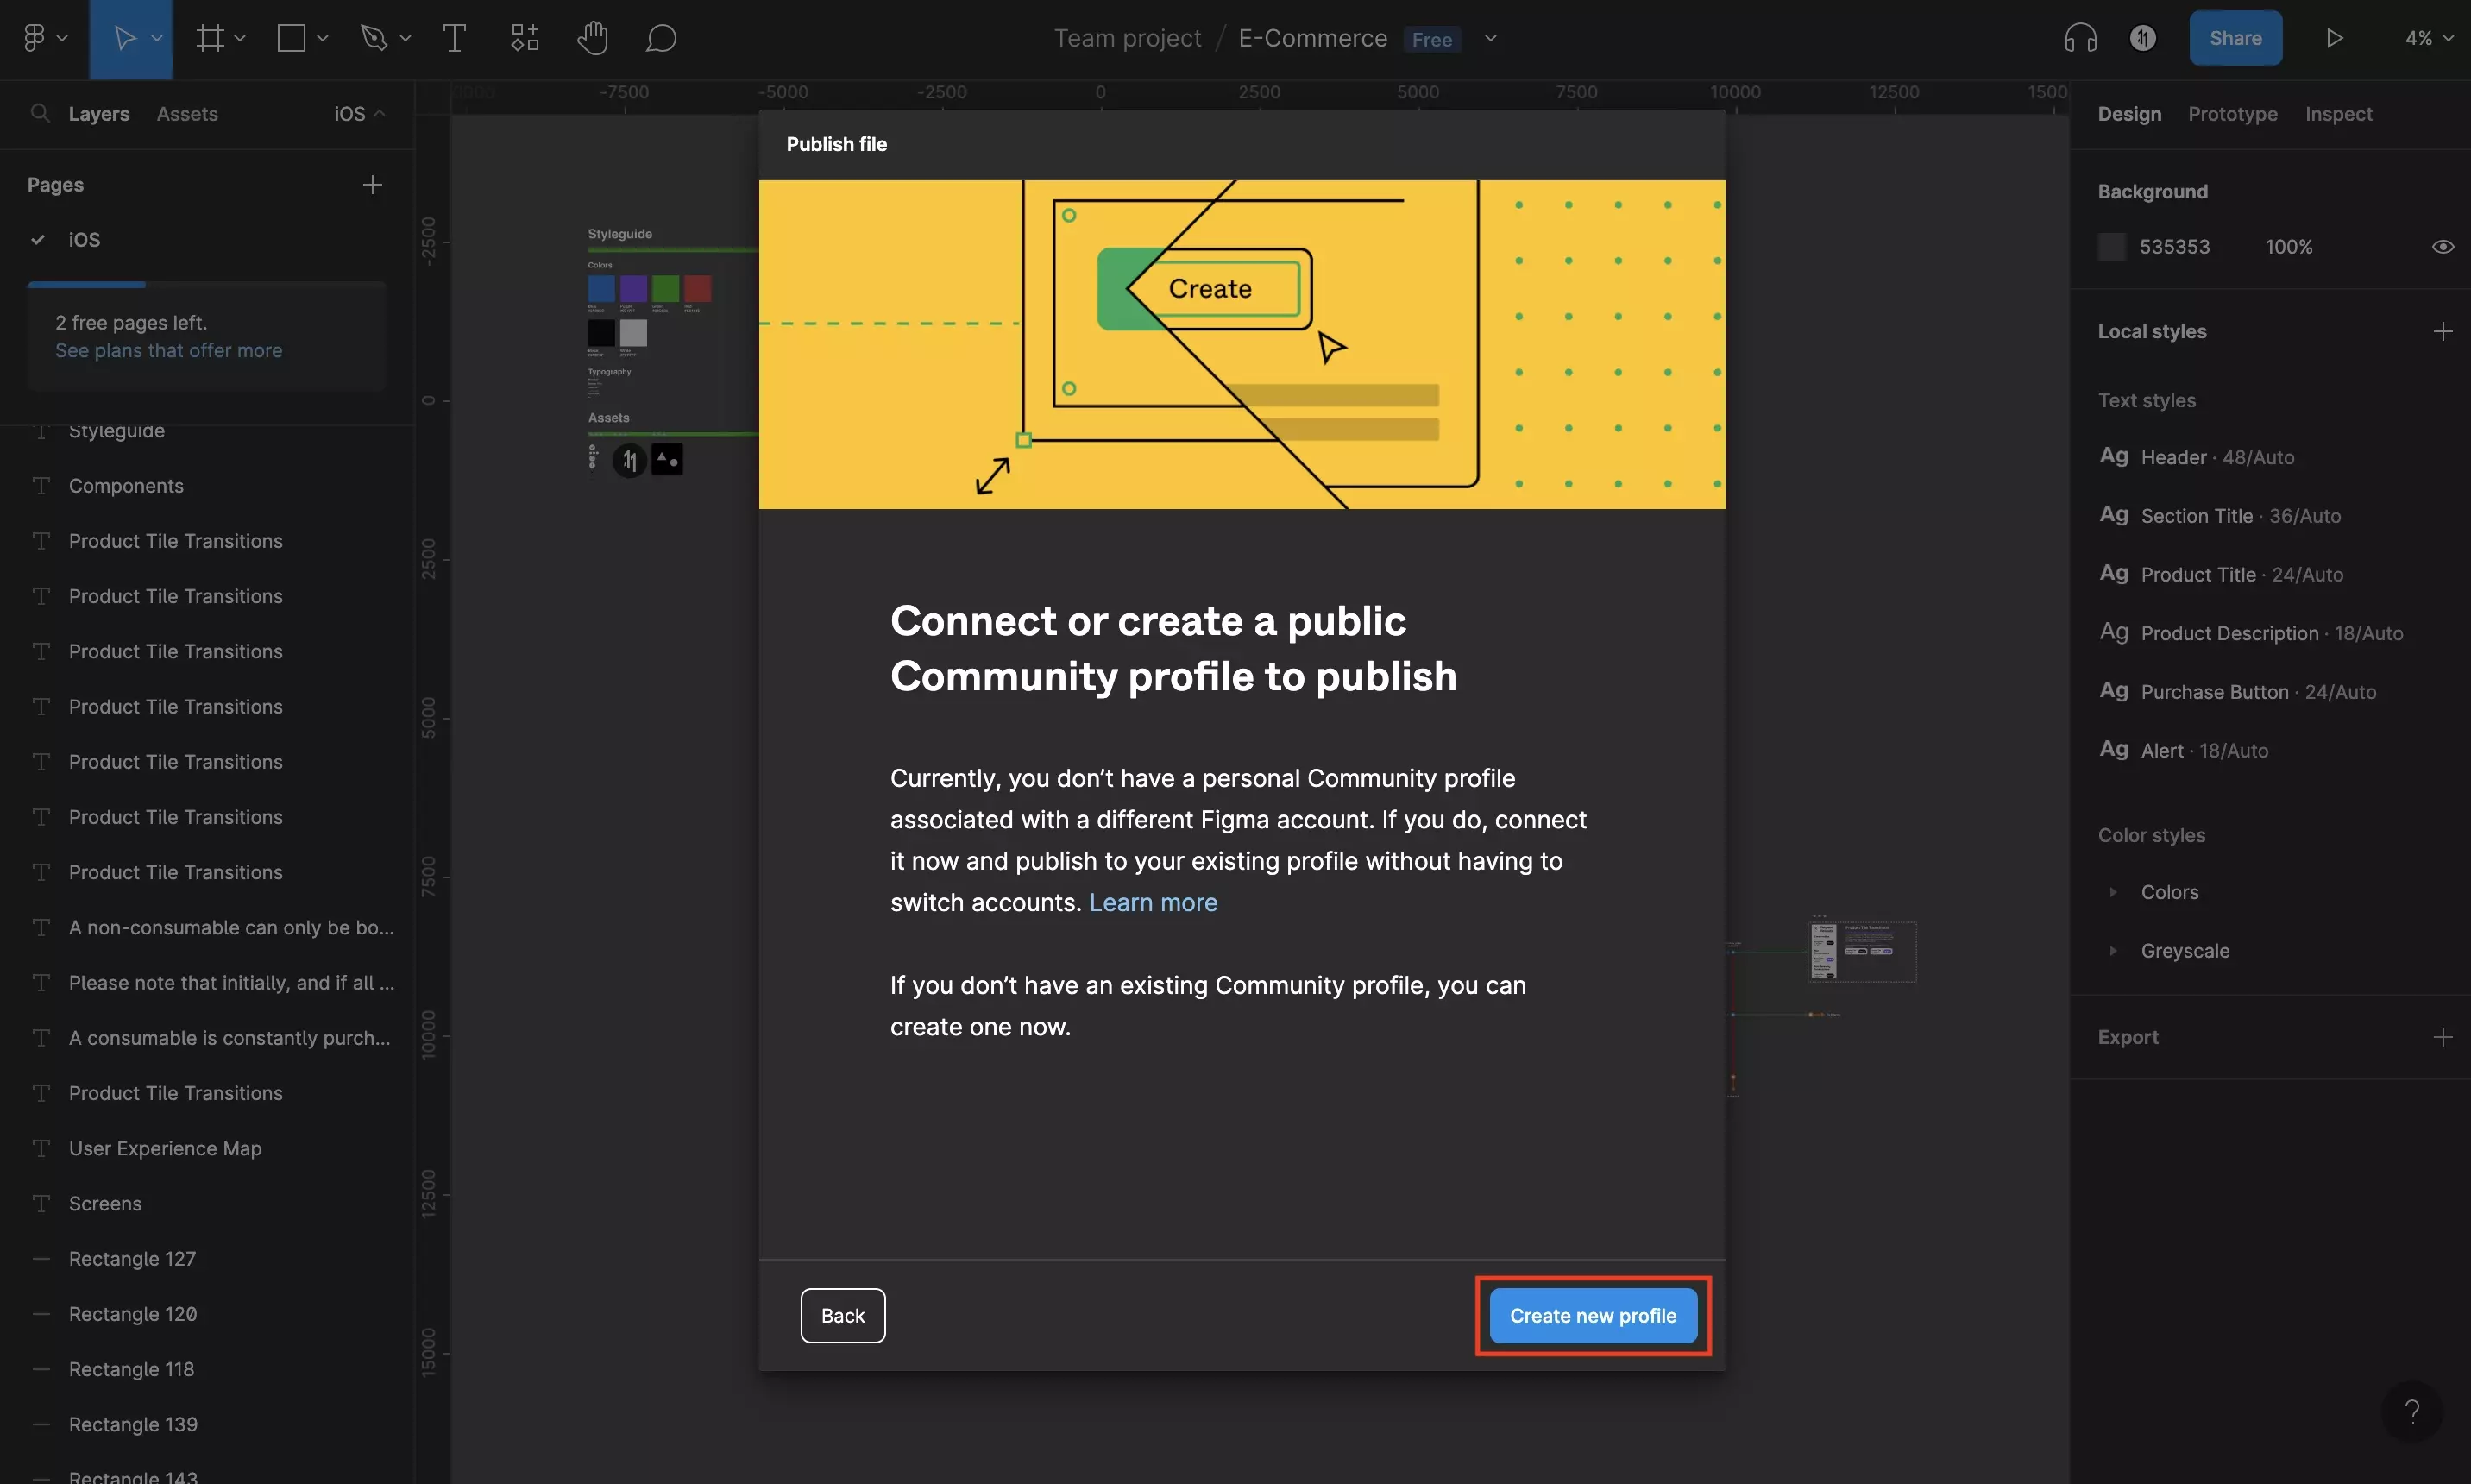 A screenshot of the modal that appears if you have not created a Figma profile. Highlighted on the bottom right is the Create a new profile button.